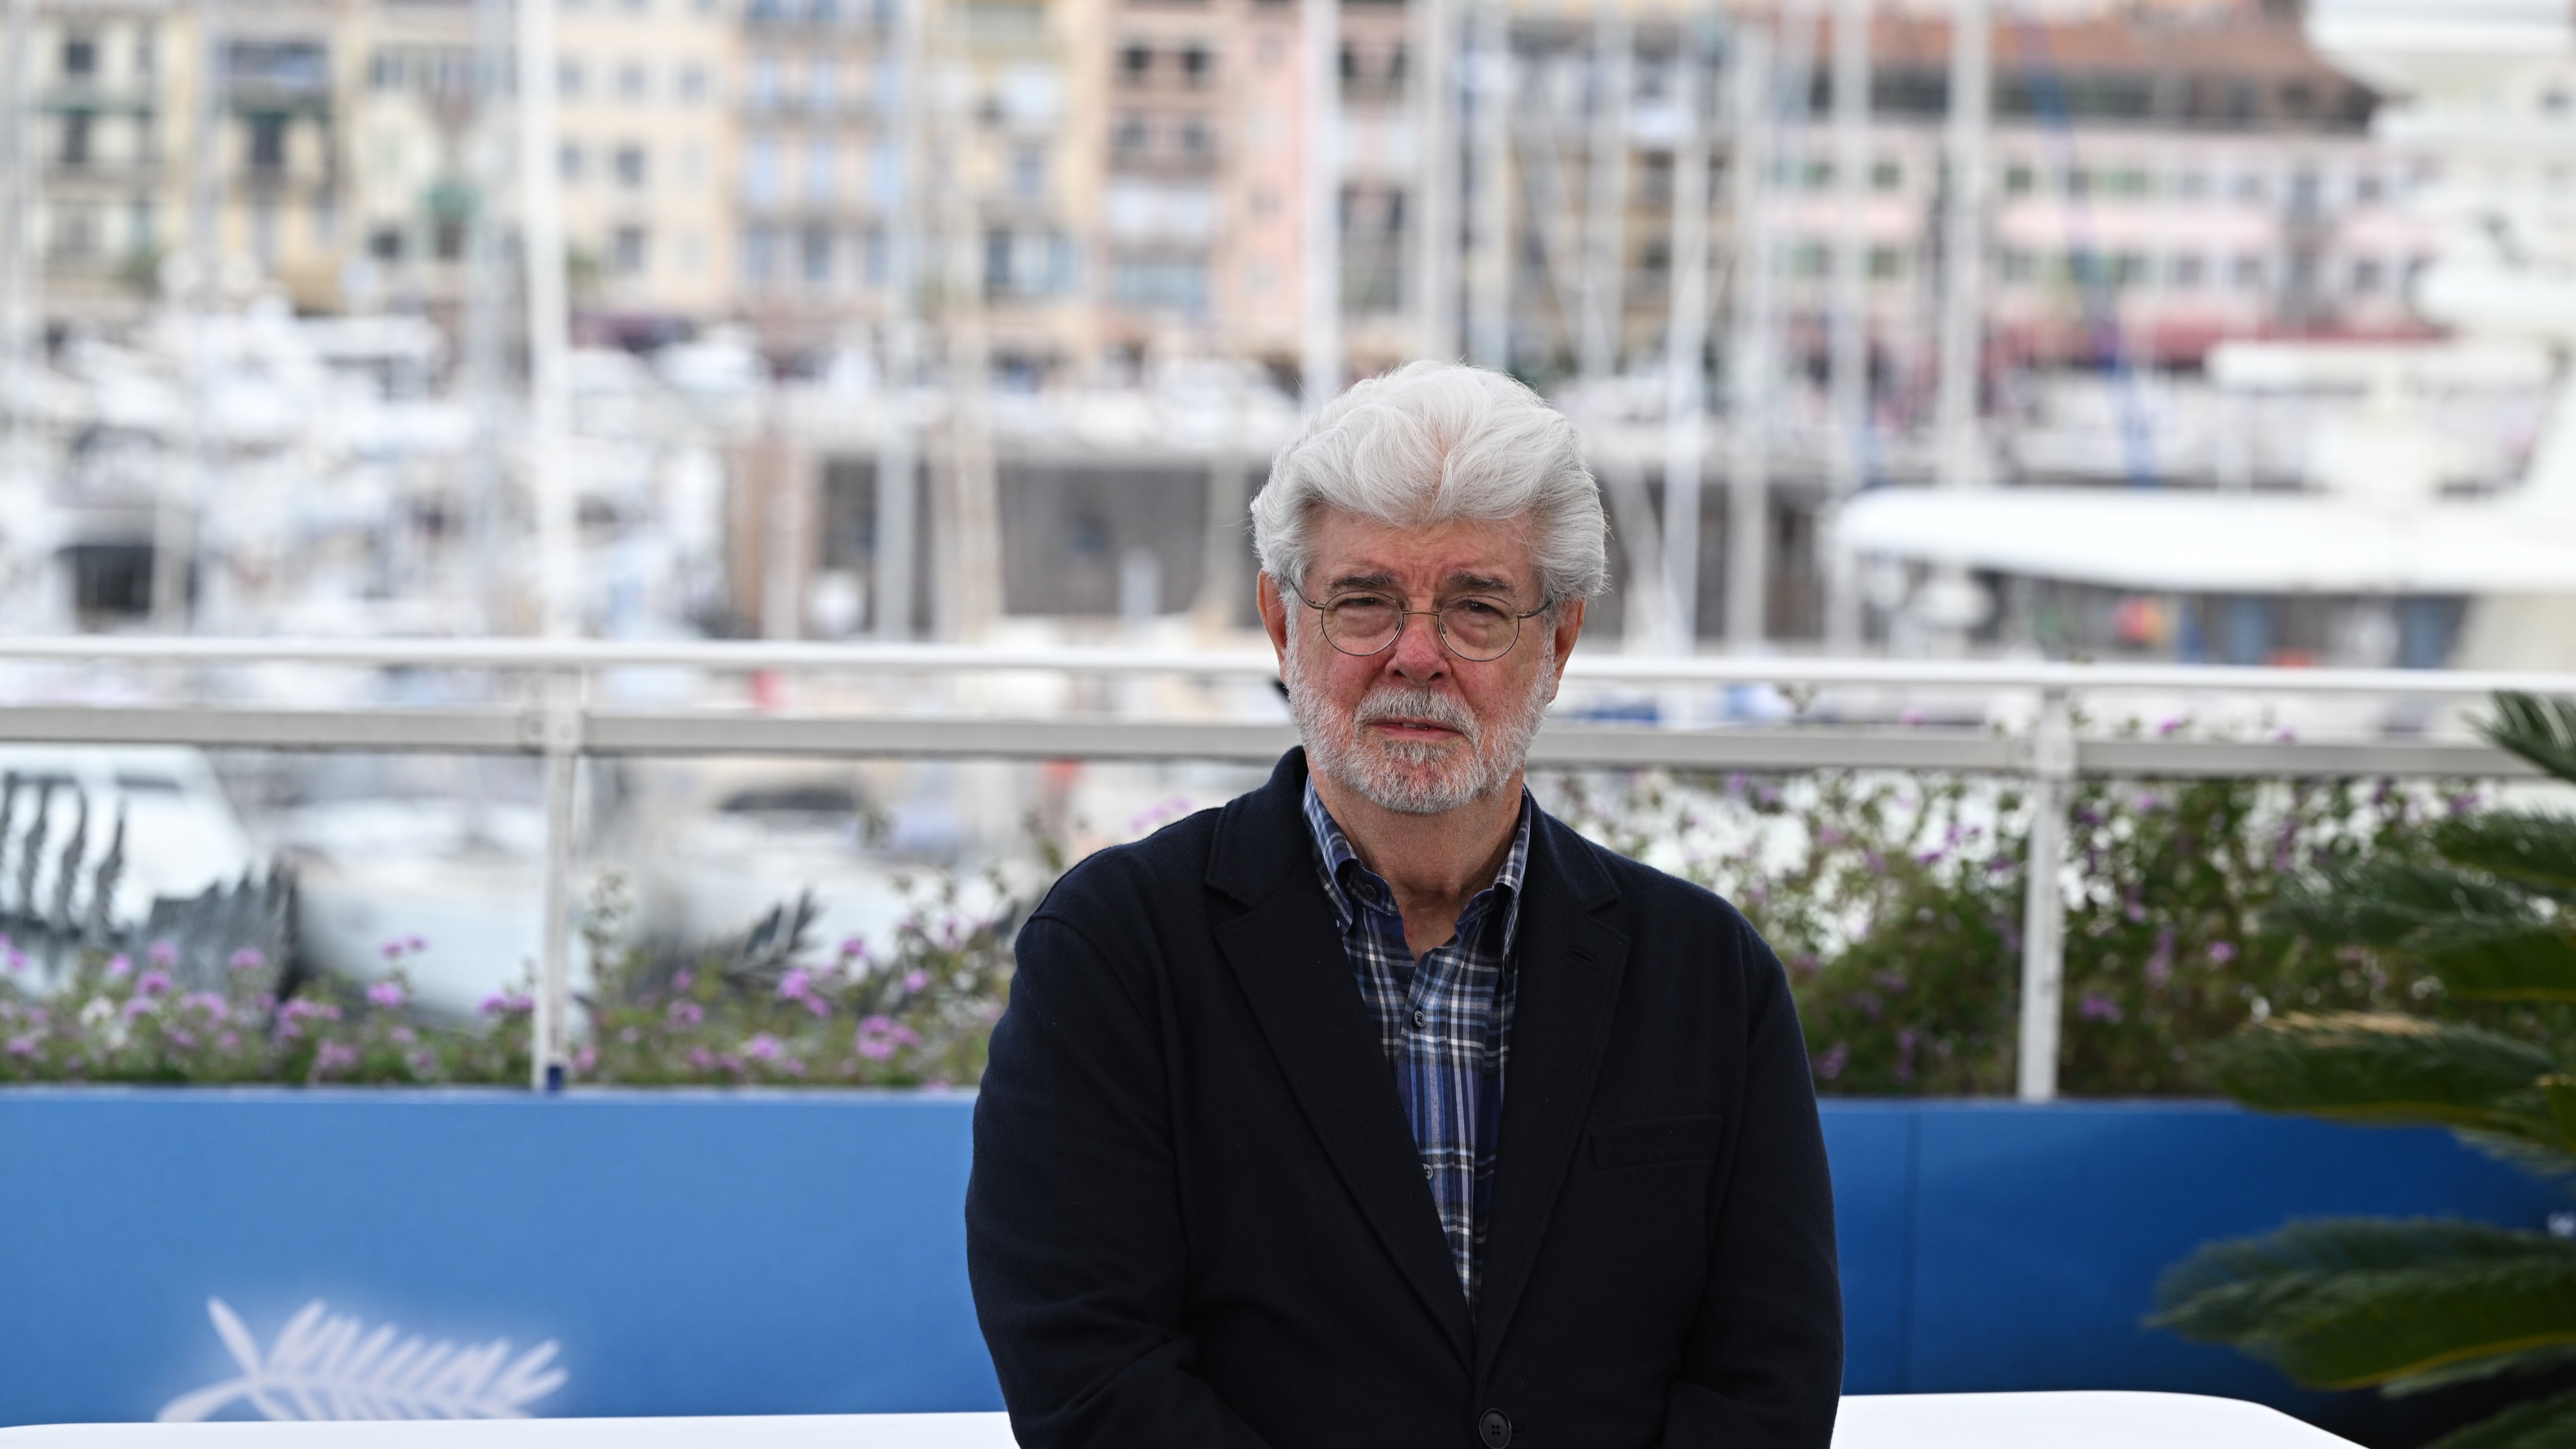 George Lucas has been awarded an Honorary Palme d’Or during the 77th Cannes Film Festival in Cannes, France